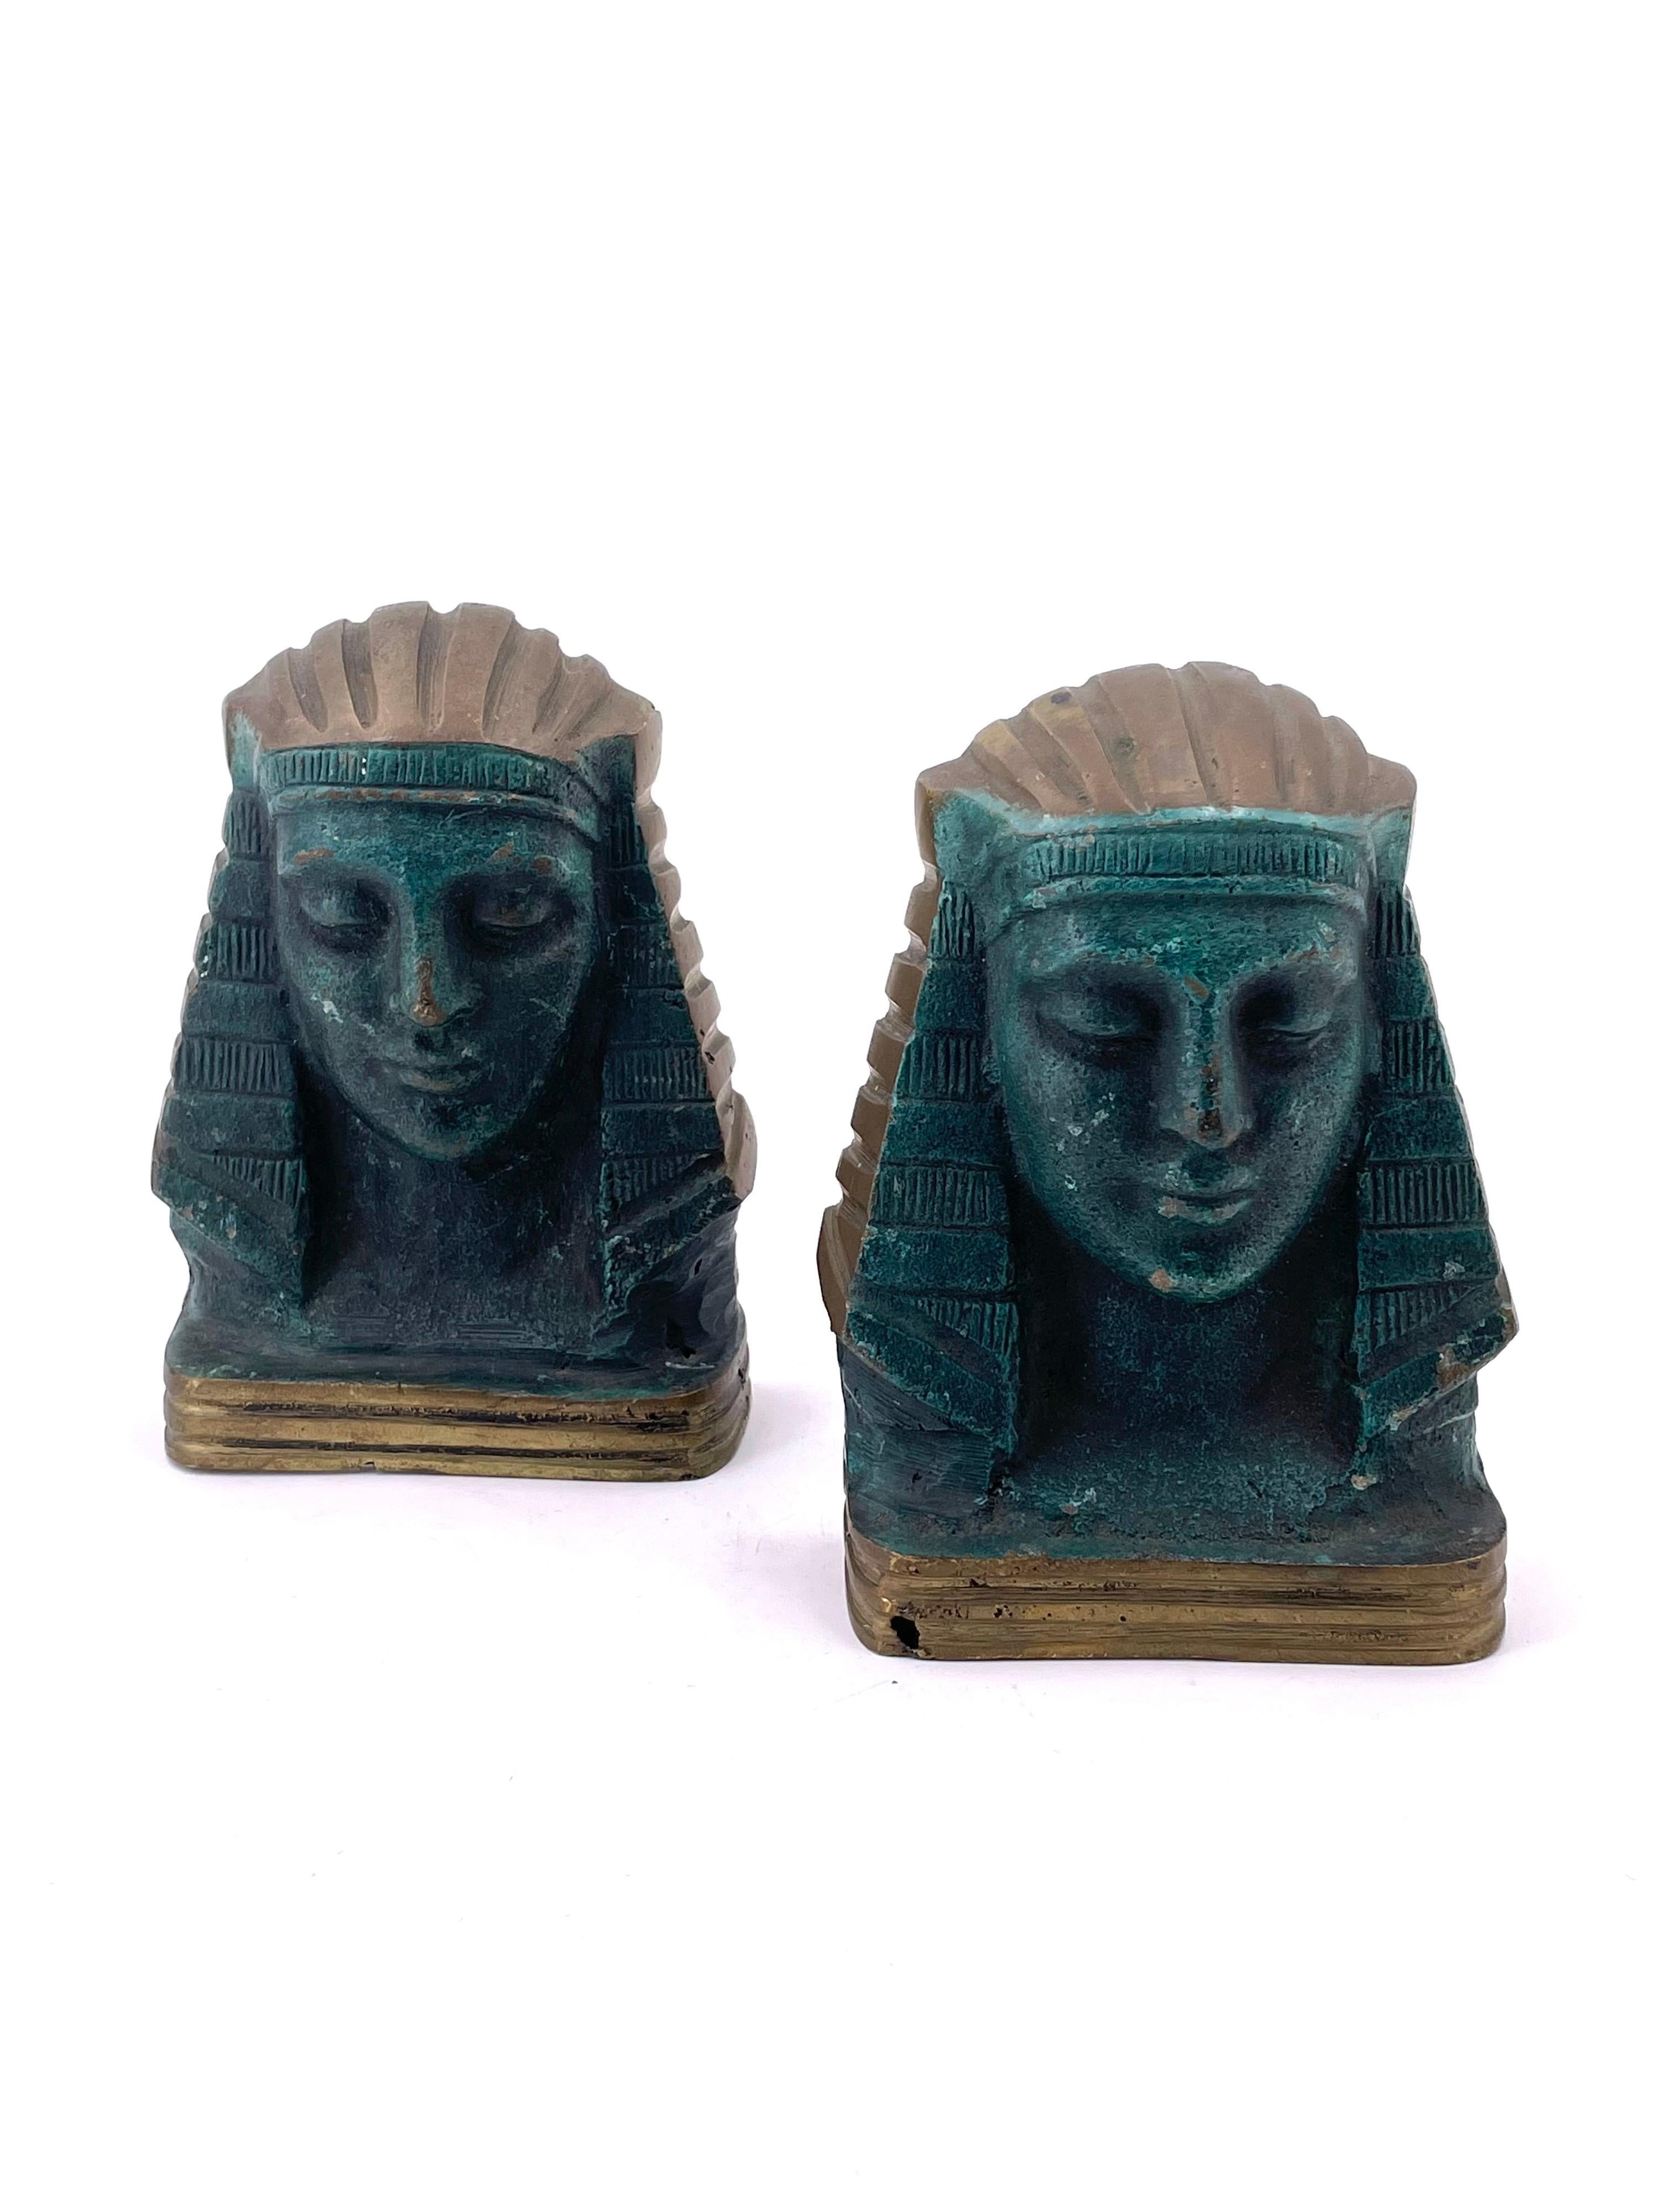 Nice and rare pair of patinated cast bronze Egyptian bookends, circa 1950s in original condition.